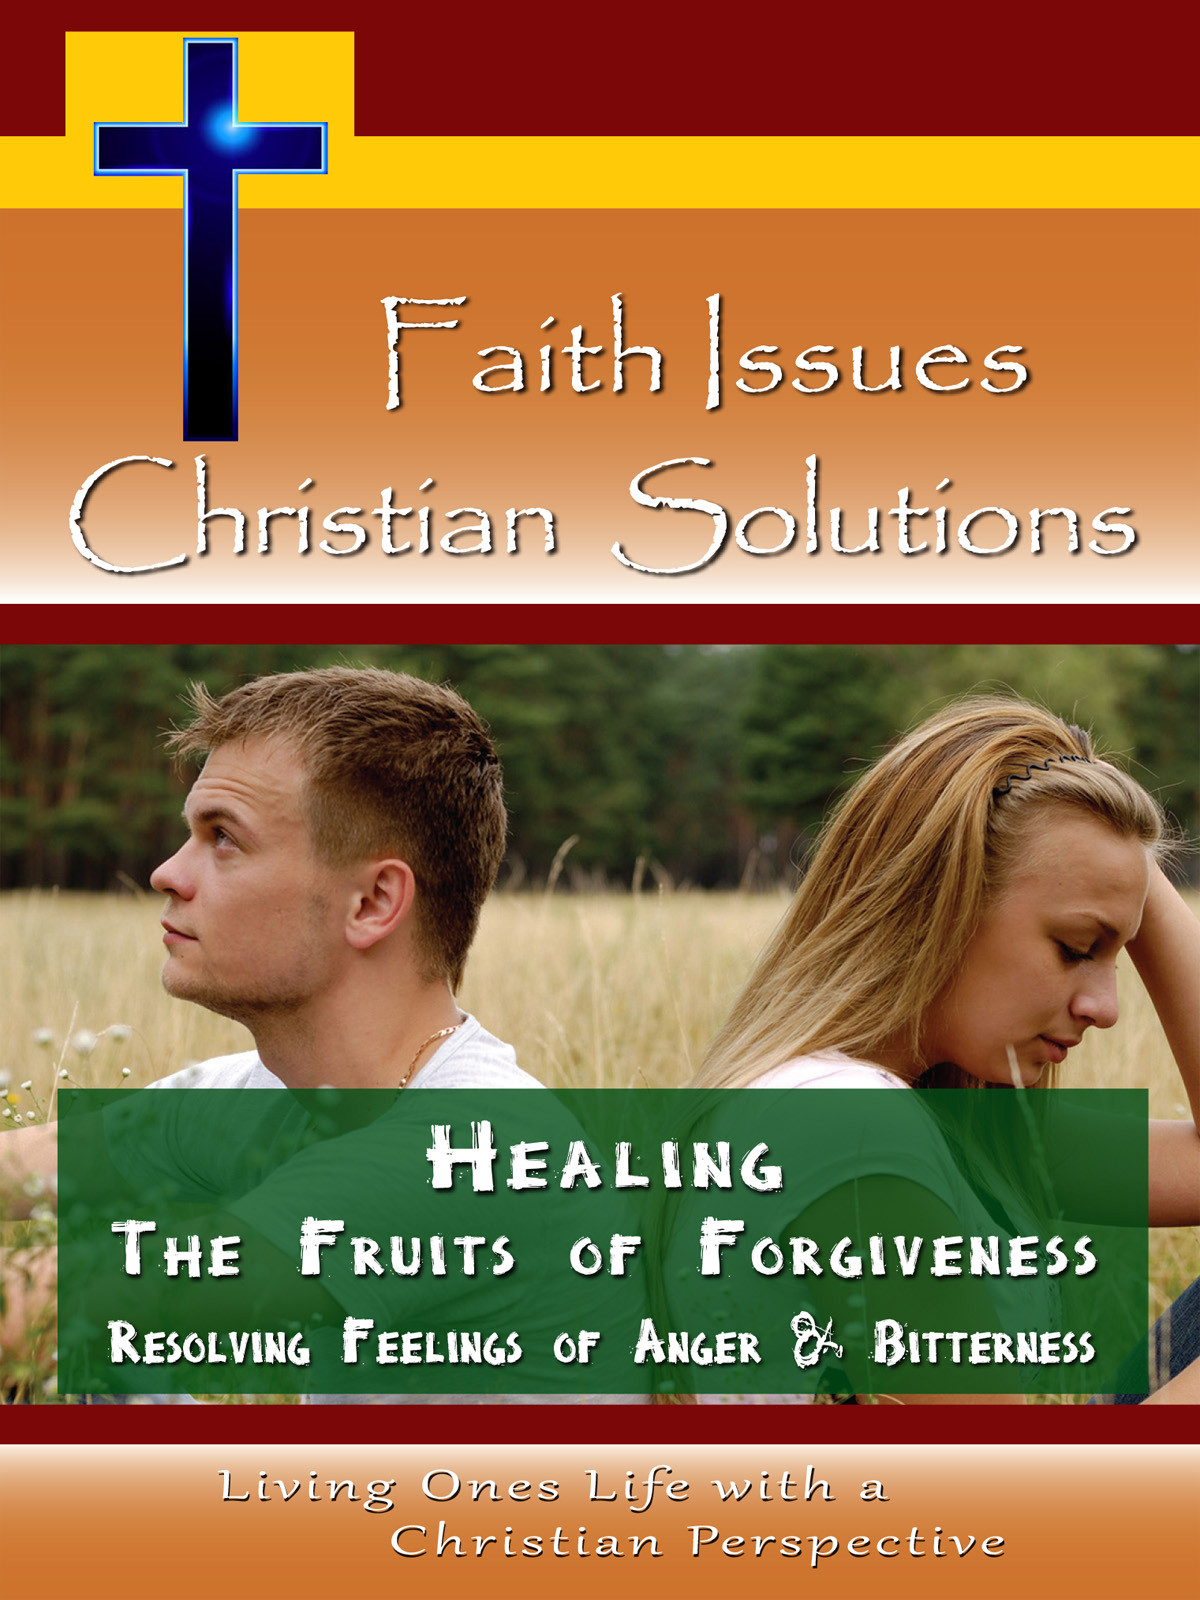 CH10019 - Healing The Fruits of Forgiveness Resolving Feelings of Anger & Bitterness